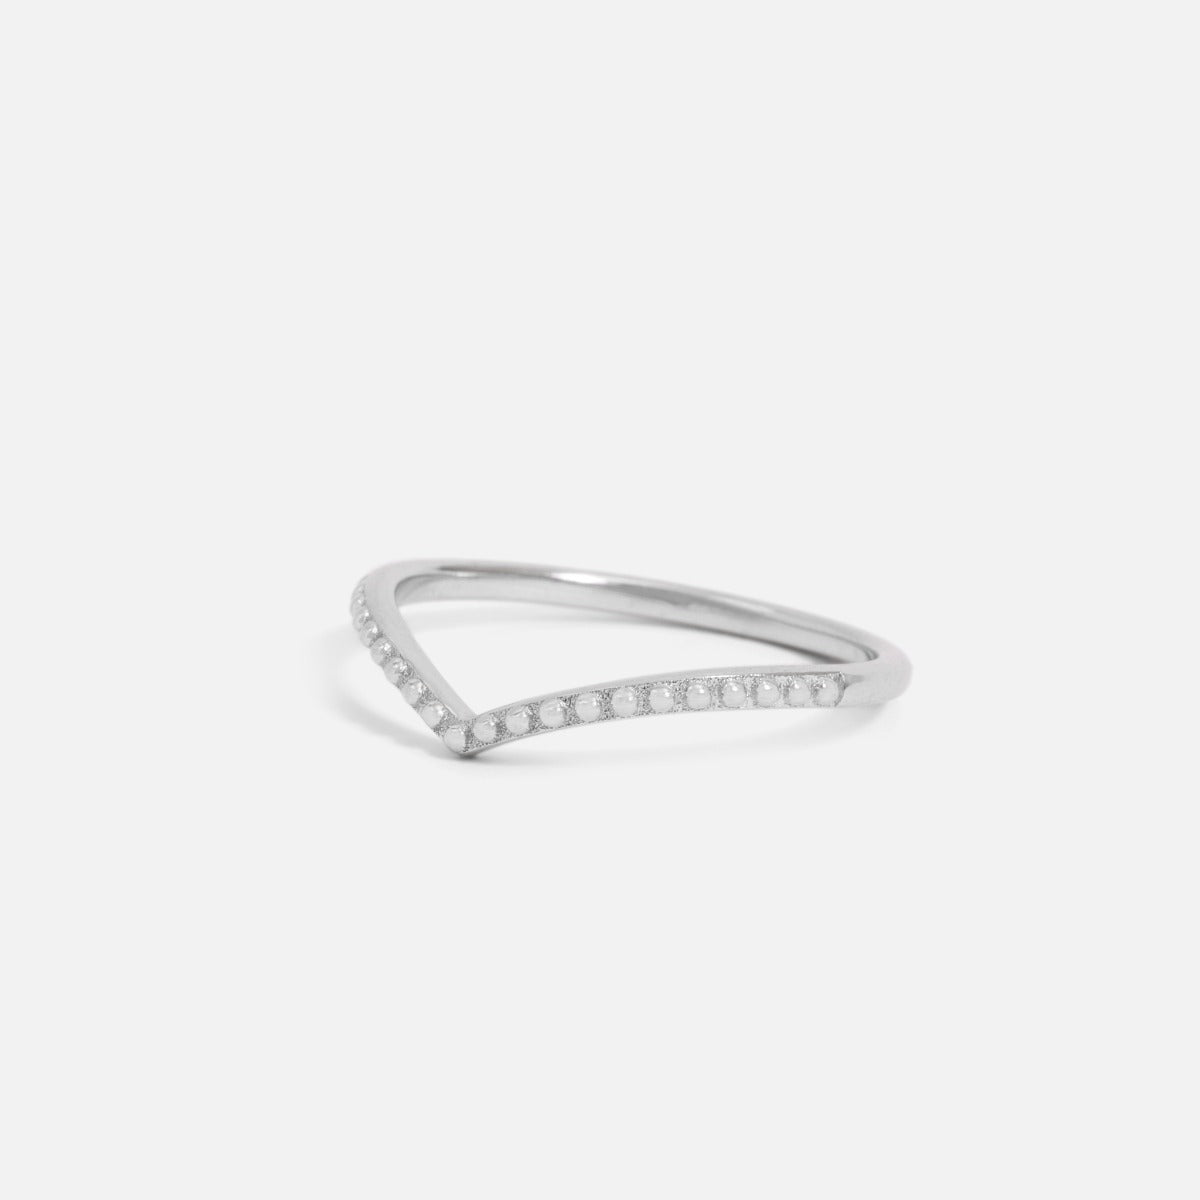 Sterling silver v shaped ring with beads effect